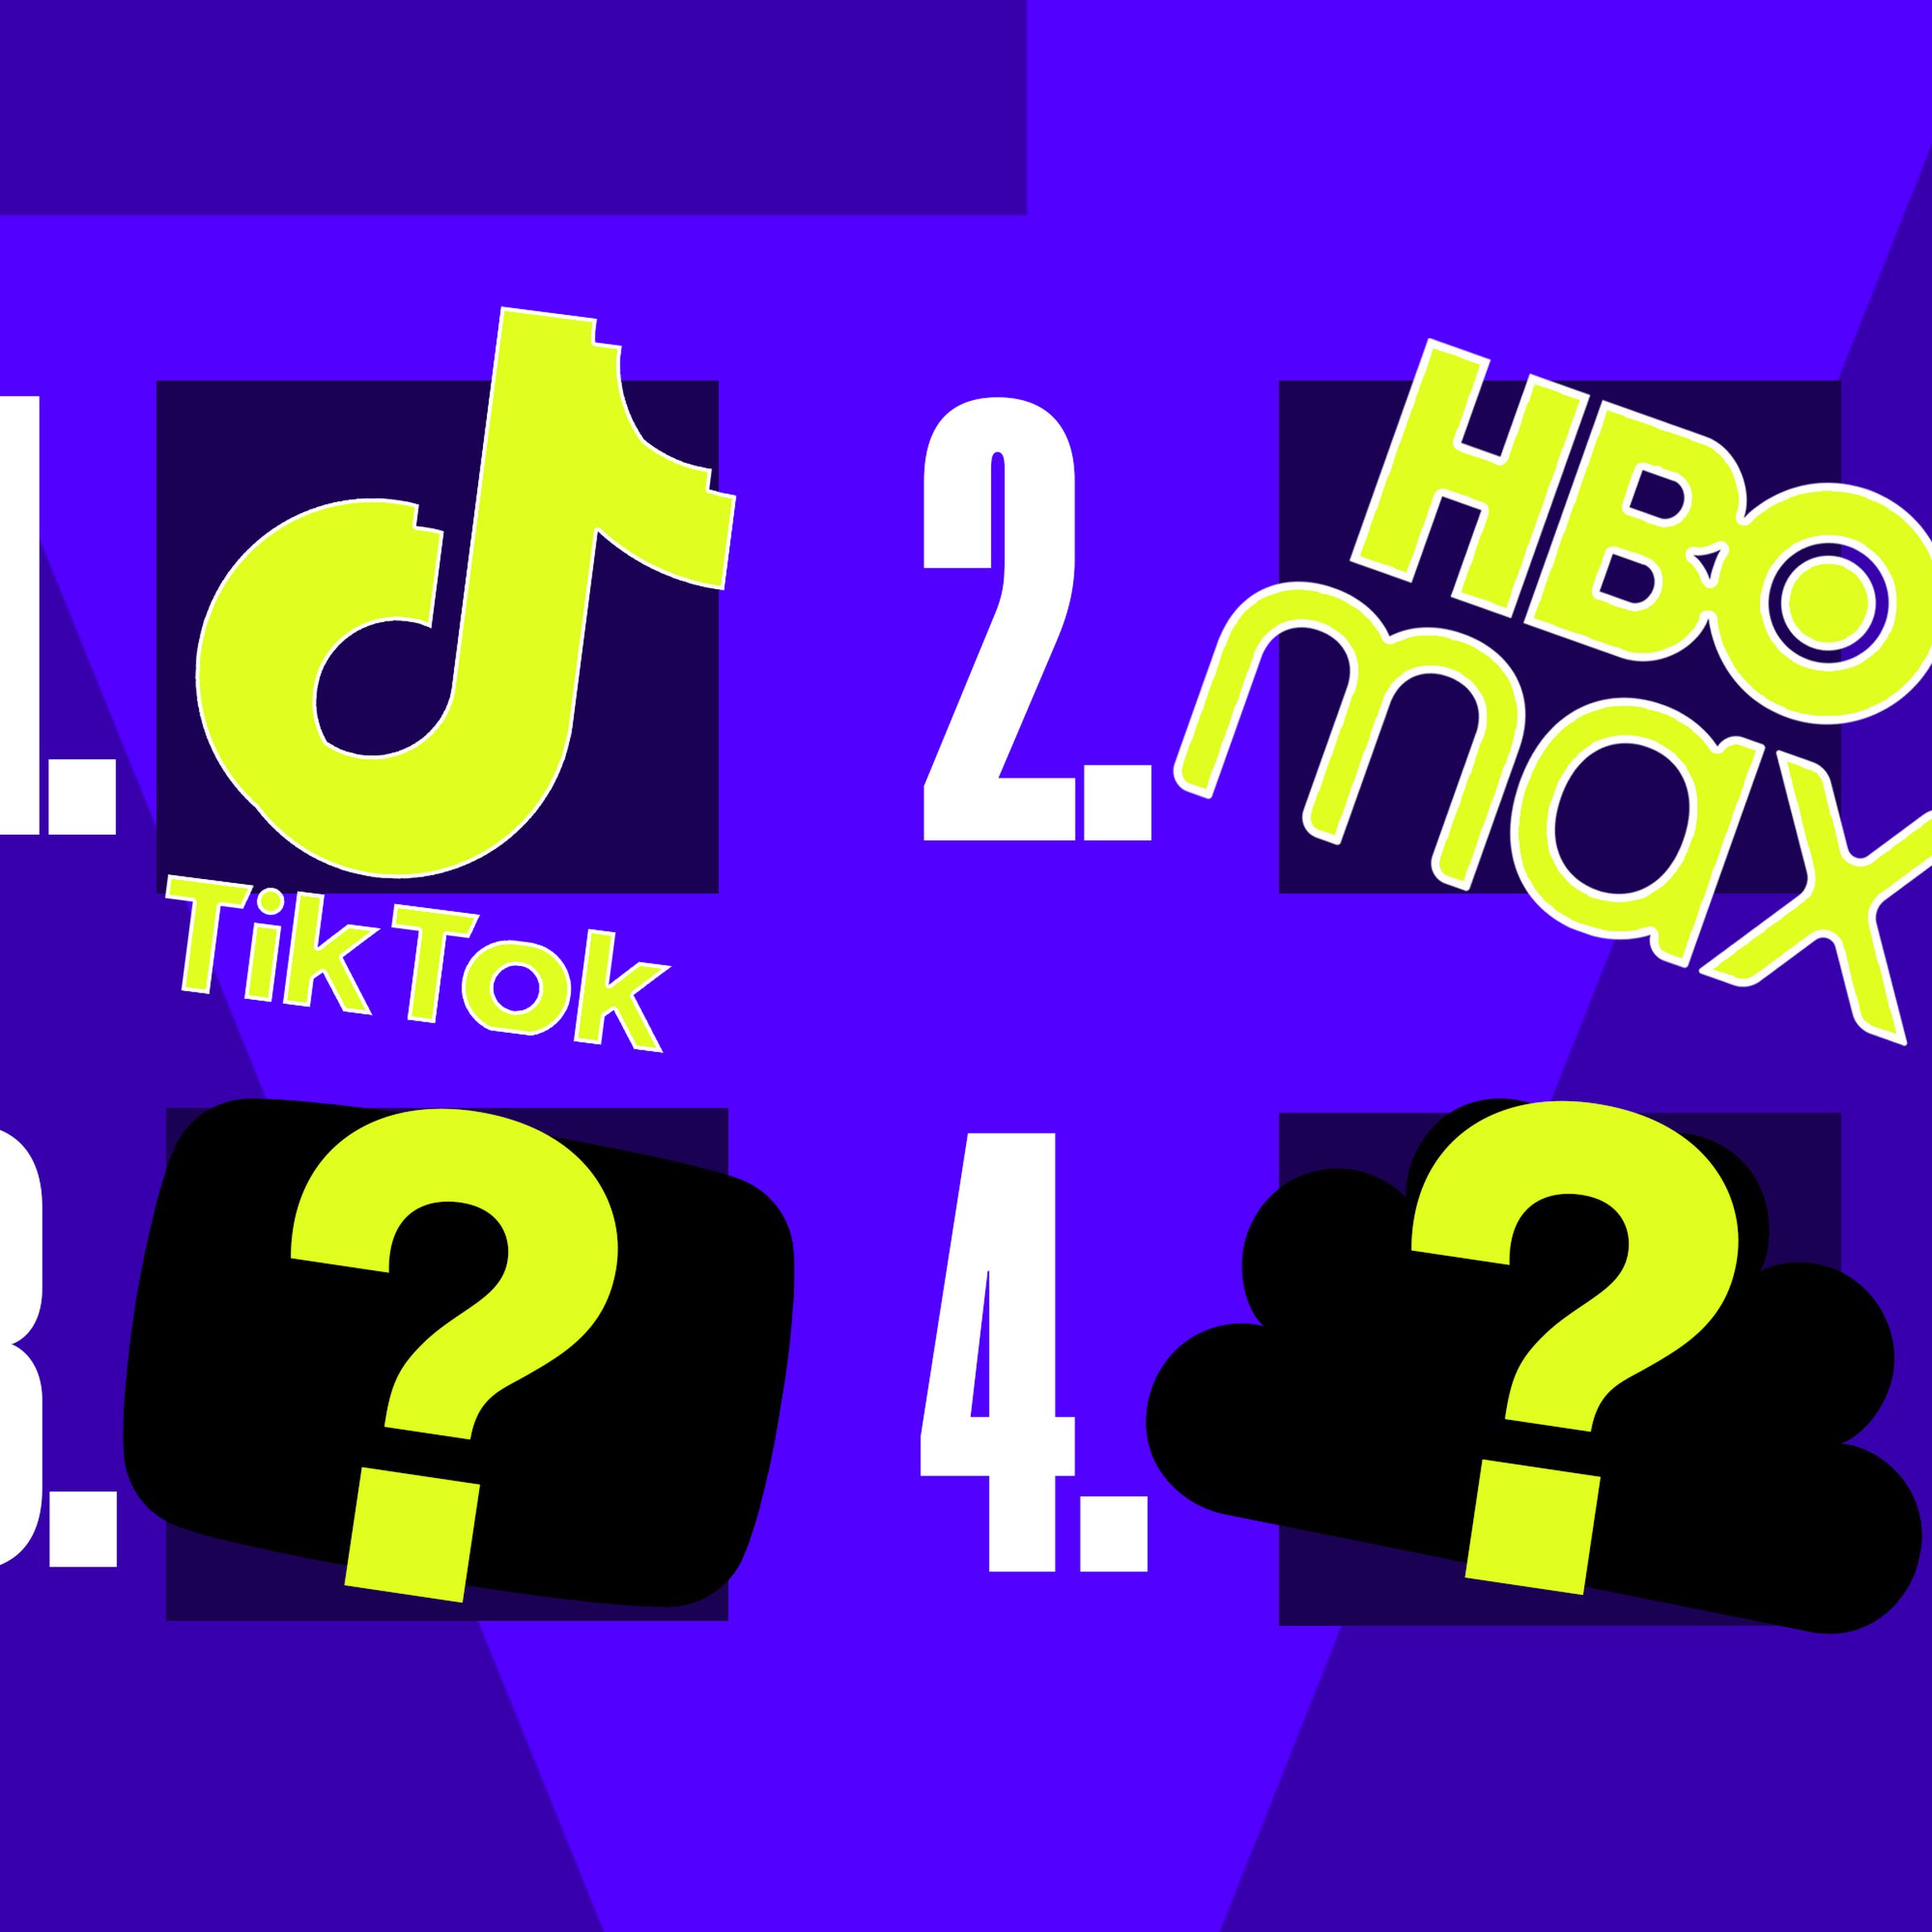 A list of favorite streaming services with TikTok, HBO Max, and two mystery picks.